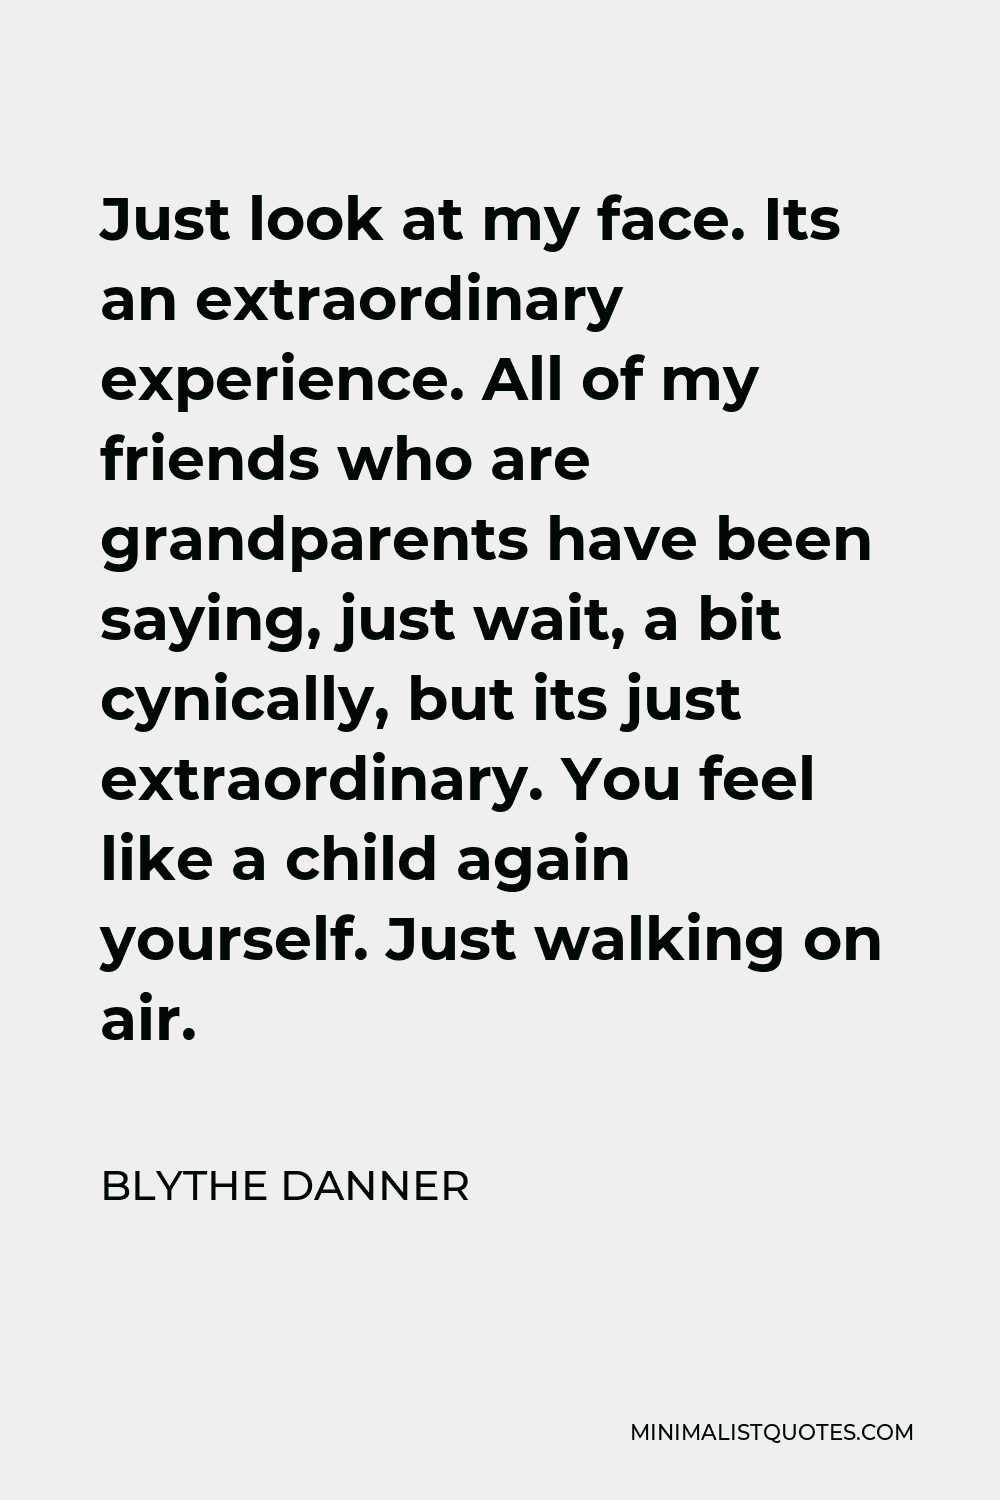 Blythe Danner Quote - Just look at my face. Its an extraordinary experience. All of my friends who are grandparents have been saying, just wait, a bit cynically, but its just extraordinary. You feel like a child again yourself. Just walking on air.